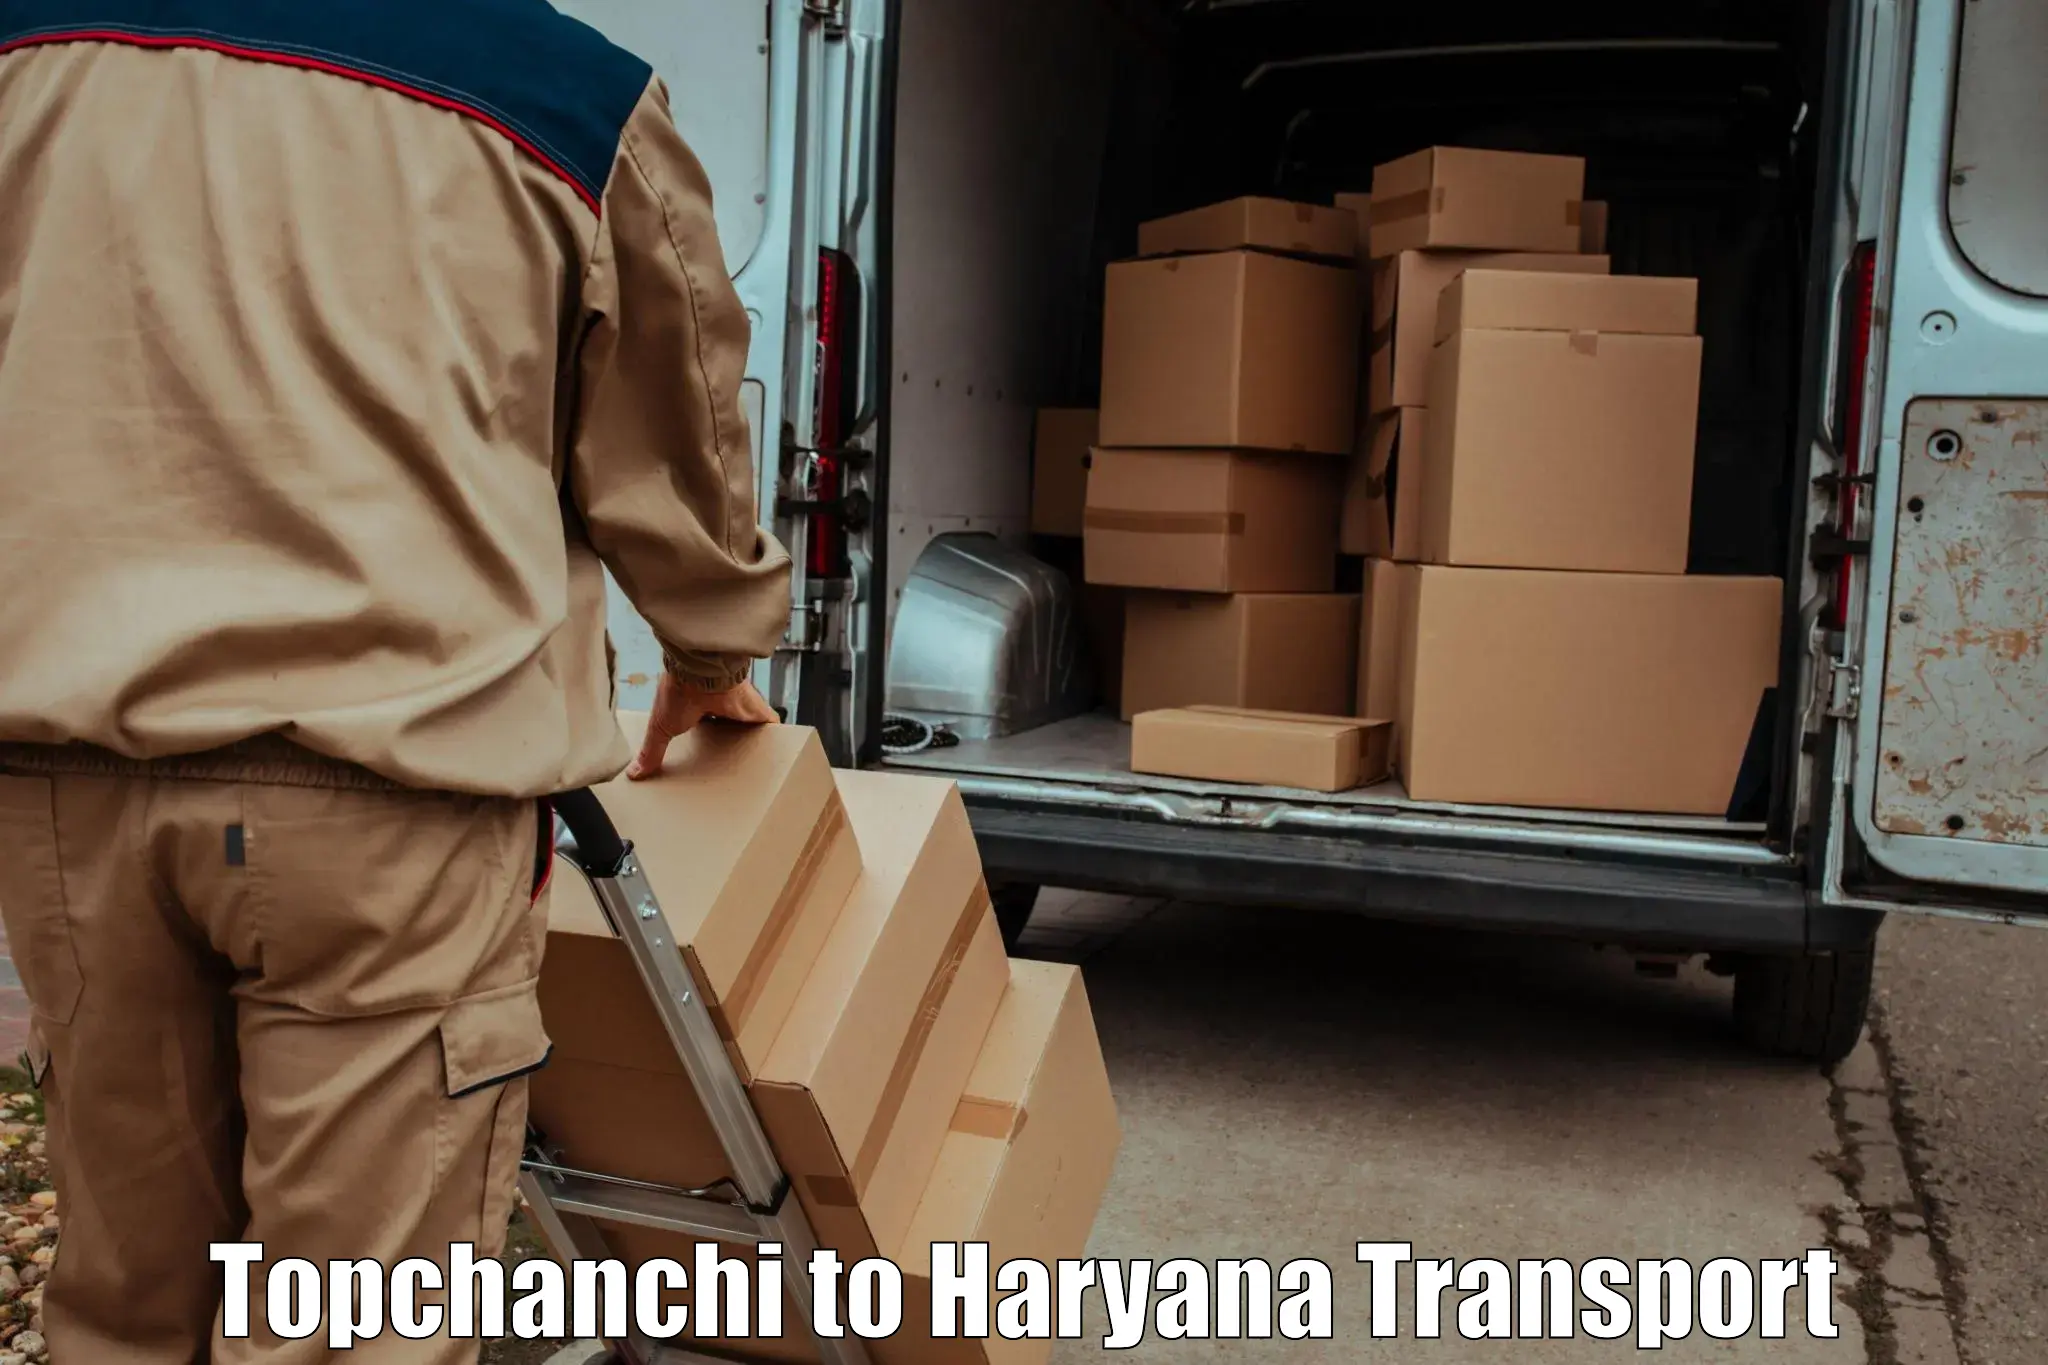 Daily parcel service transport Topchanchi to Haryana